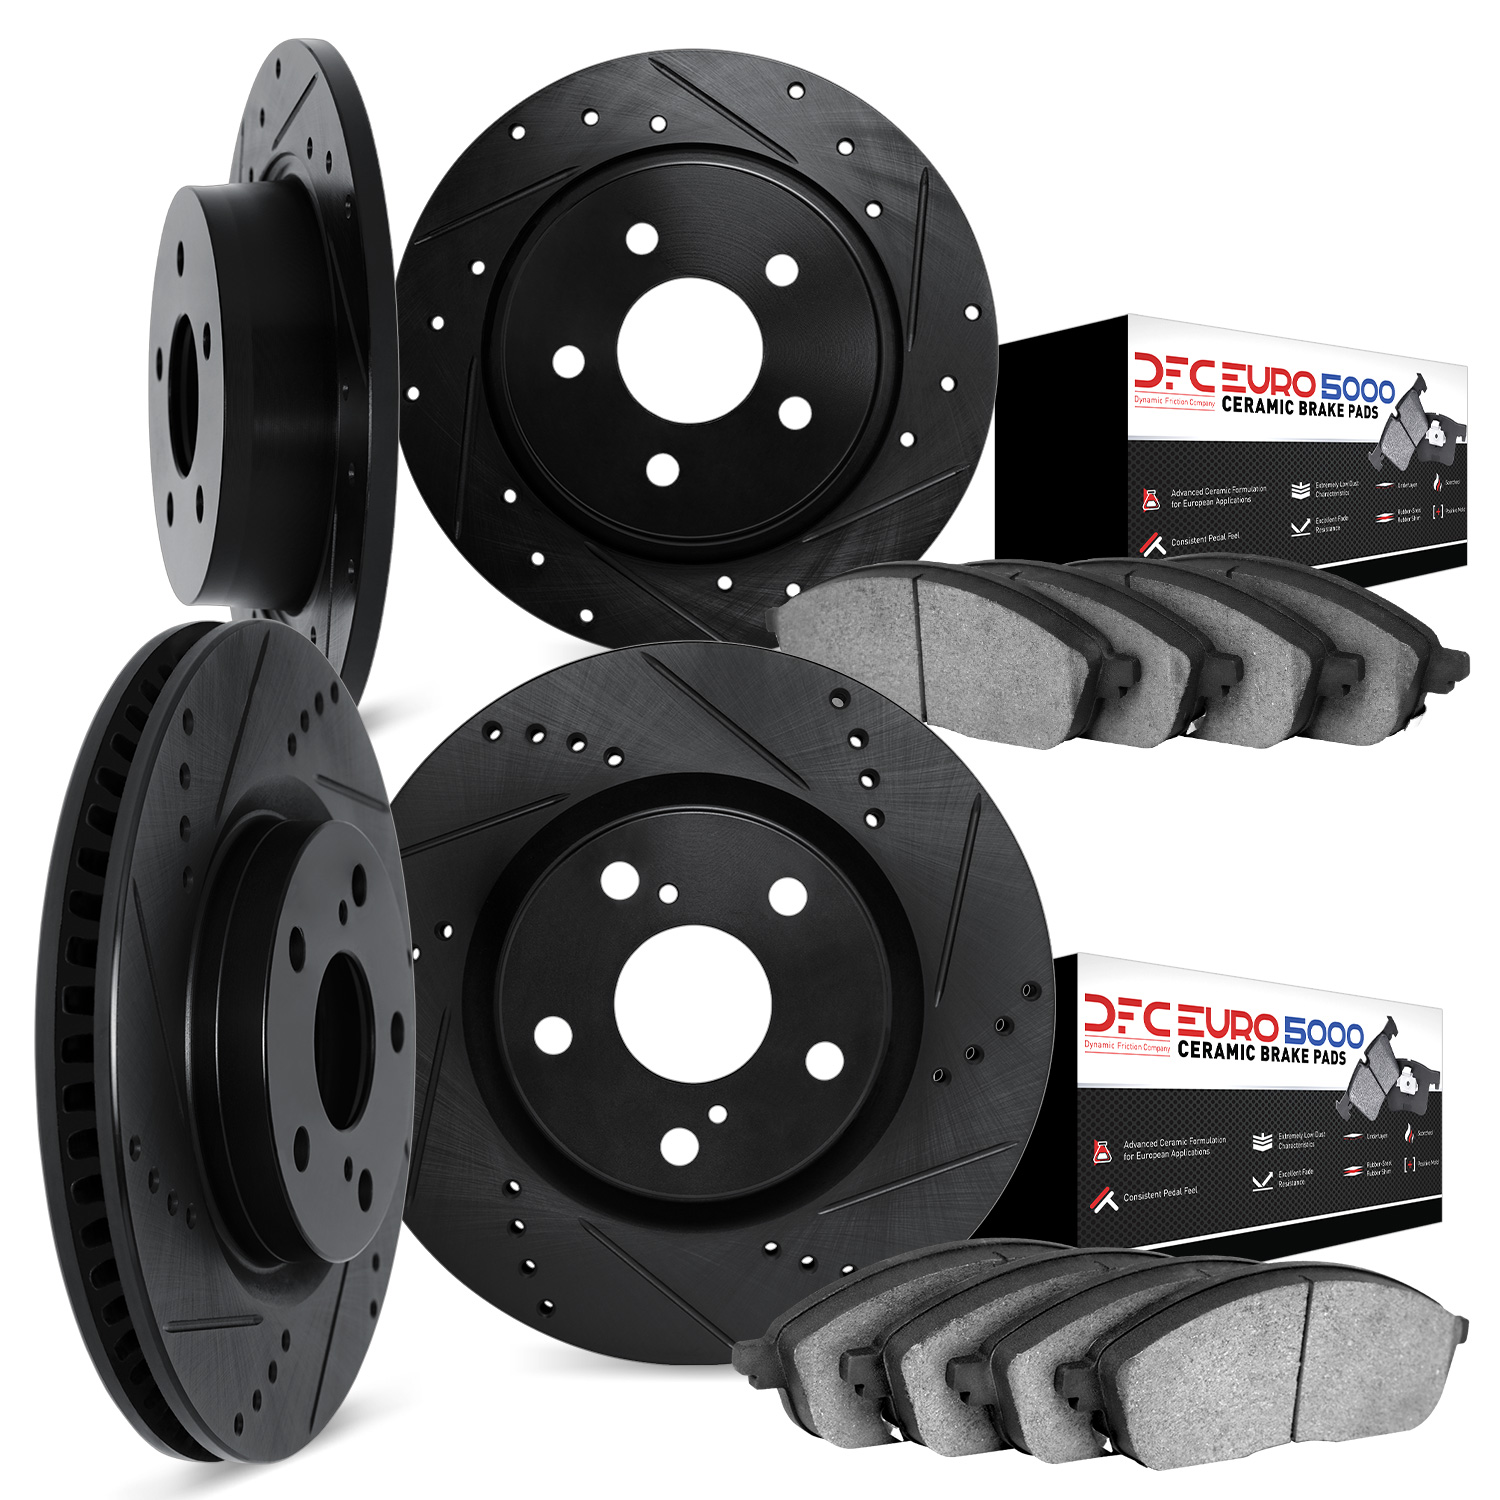 8604-11000 Drilled/Slotted Brake Rotors w/5000 Euro Ceramic Brake Pads Kit [Black], 1994-2002 Land Rover, Position: Front and Re